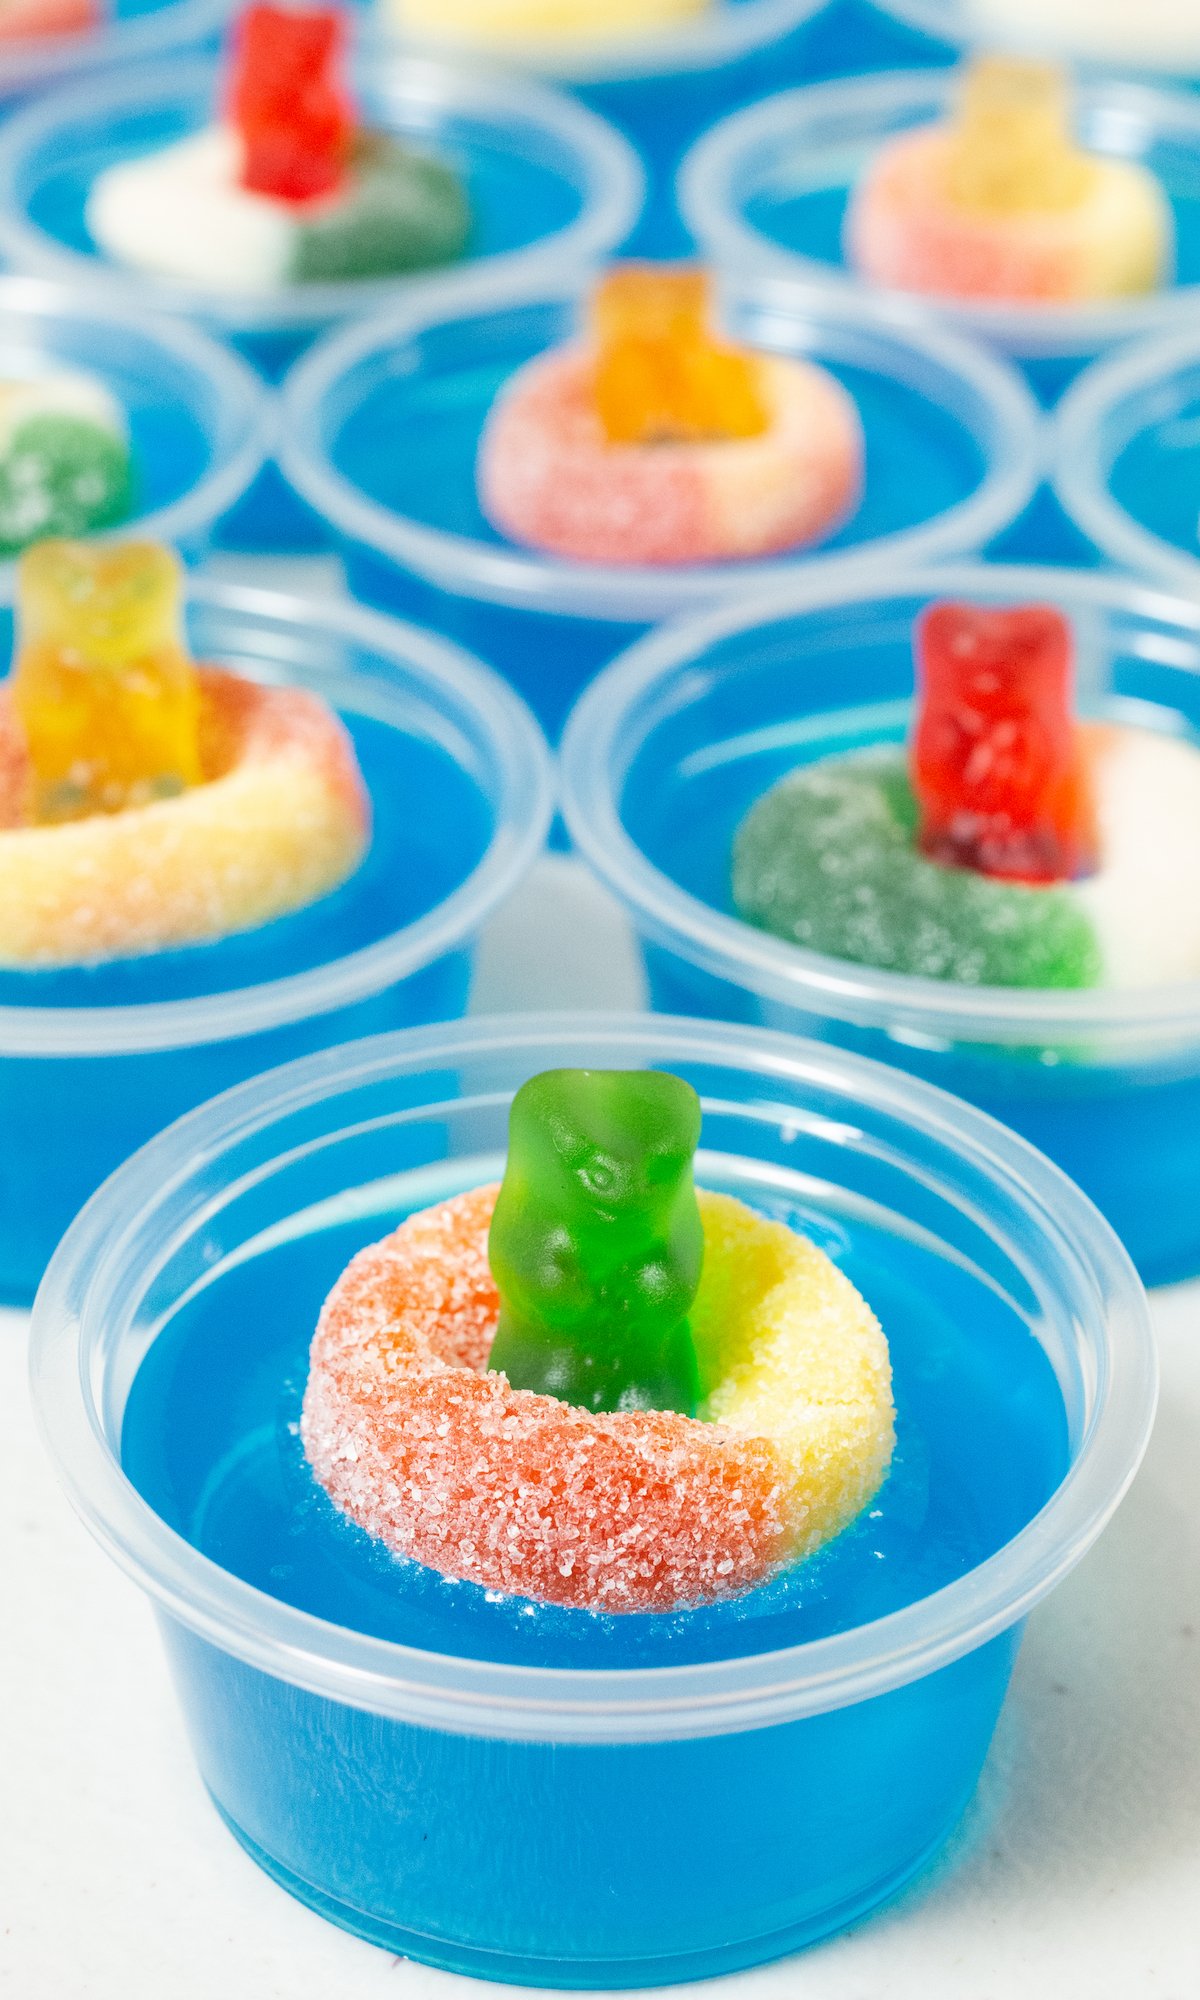 9 2oz plastic containers filled with bright blue jello topped with a candy gummy bear and gummy ring.